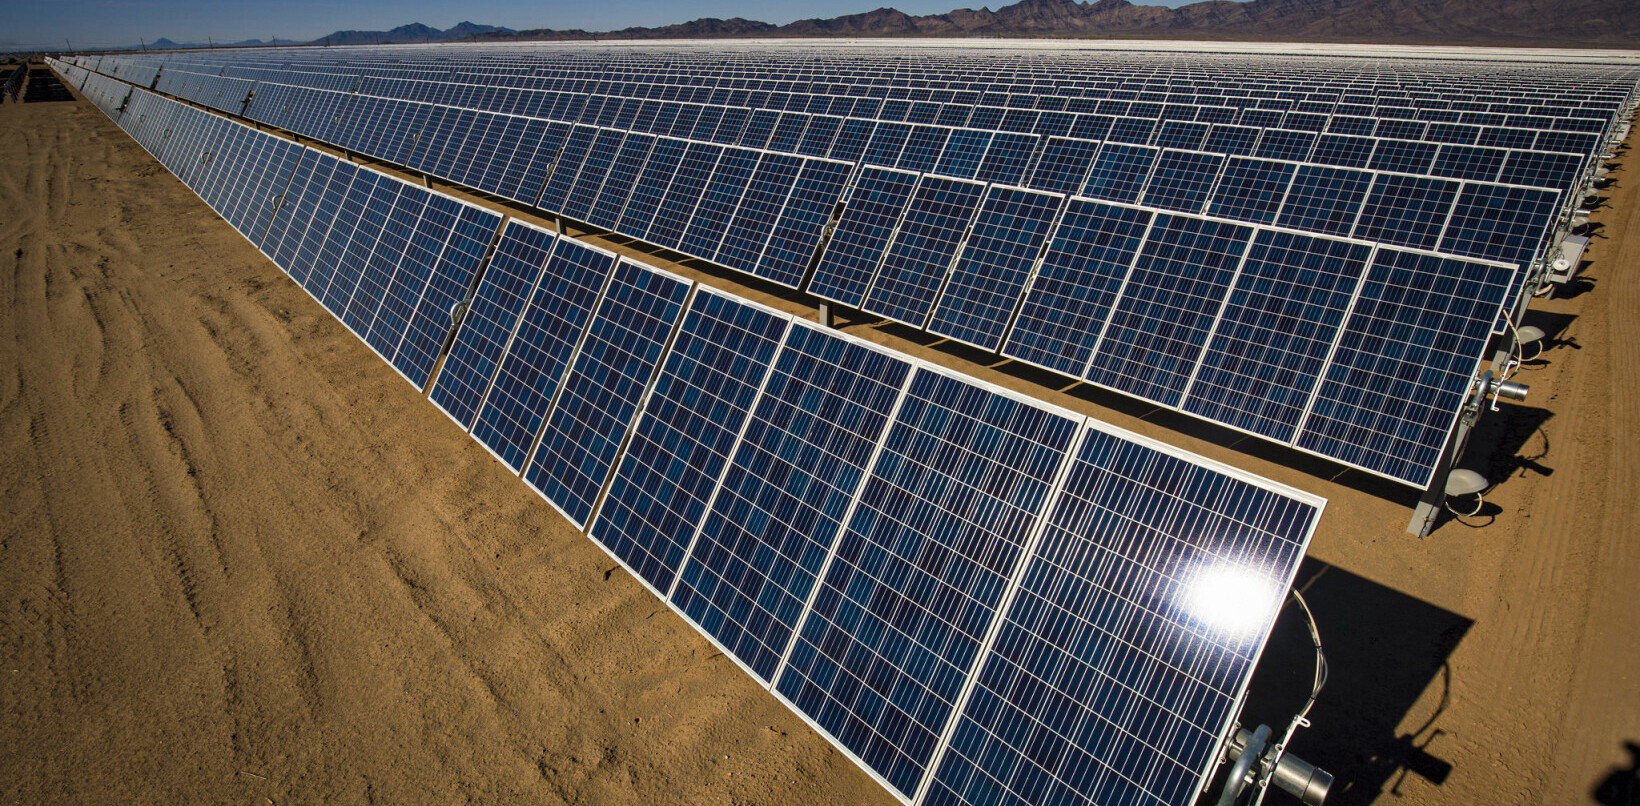 Solar panels in the Sahara could boost renewable energy — but raise temperatures worldwide